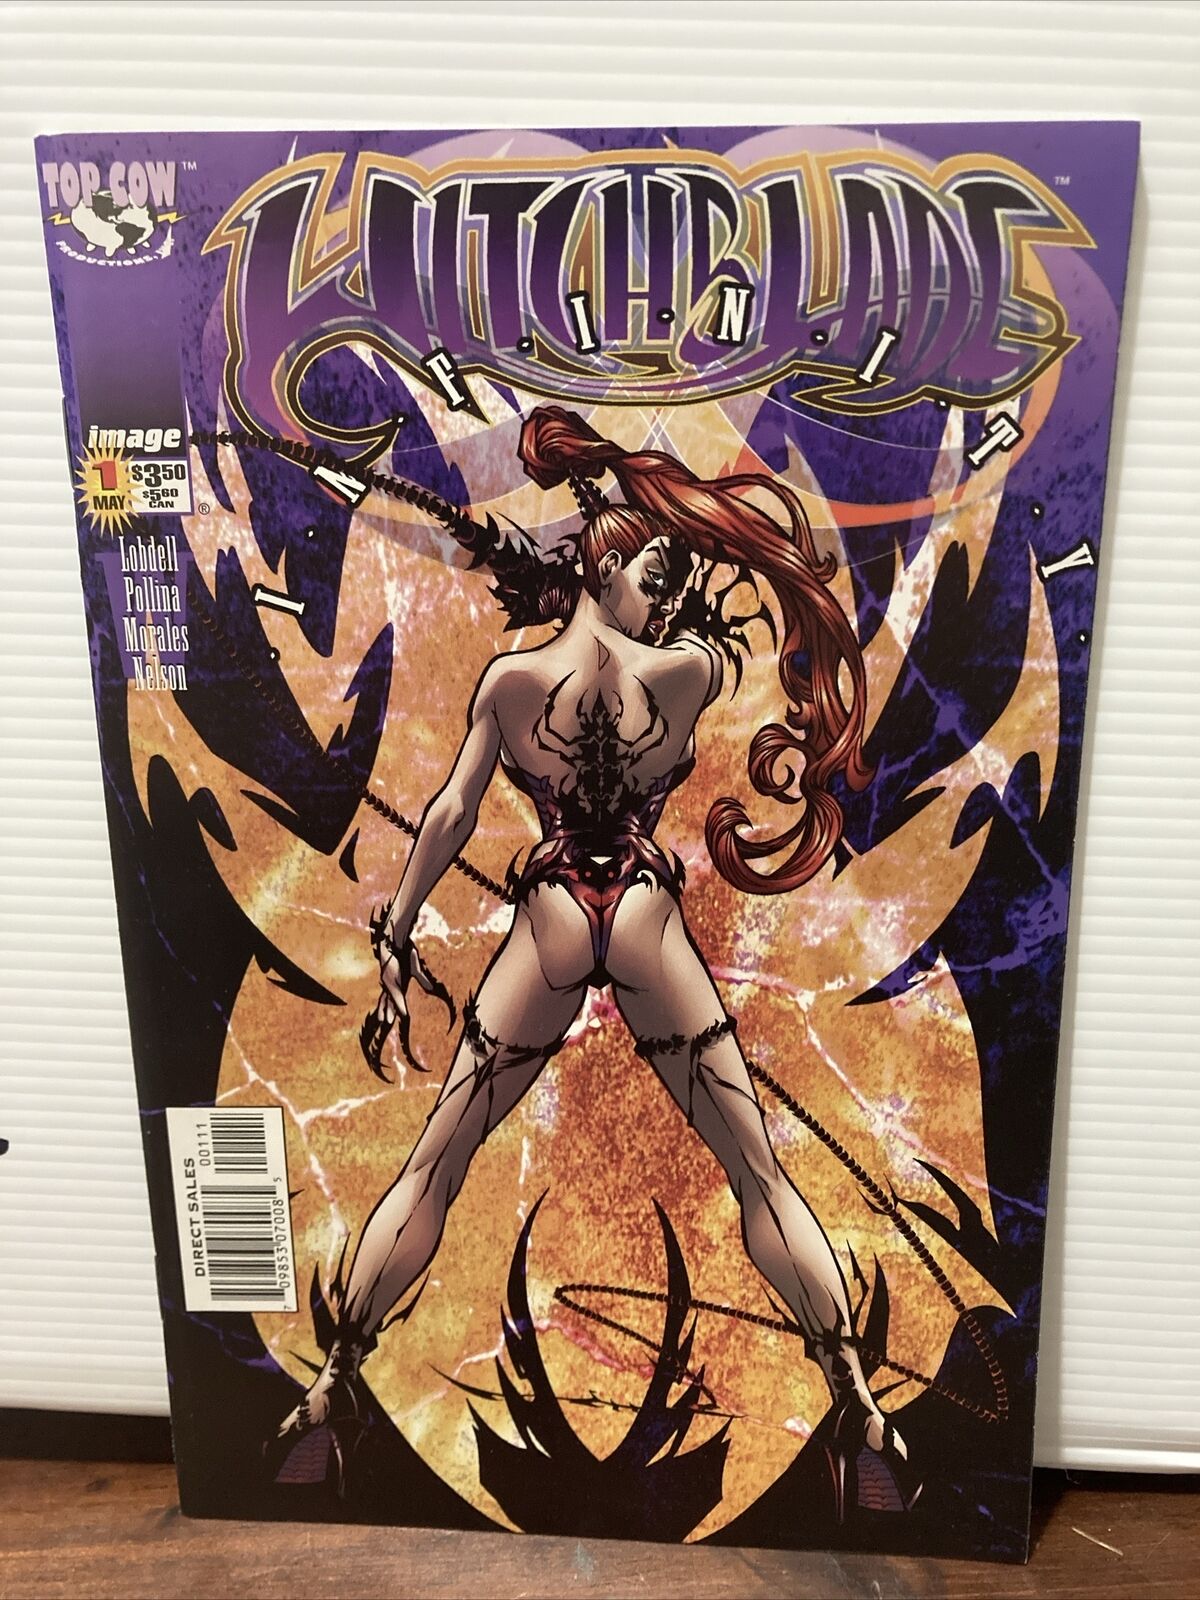 Witchblade INFINITY #1 May 1999 Image Top Cow Comics LOBDELL POLLONA MORALES